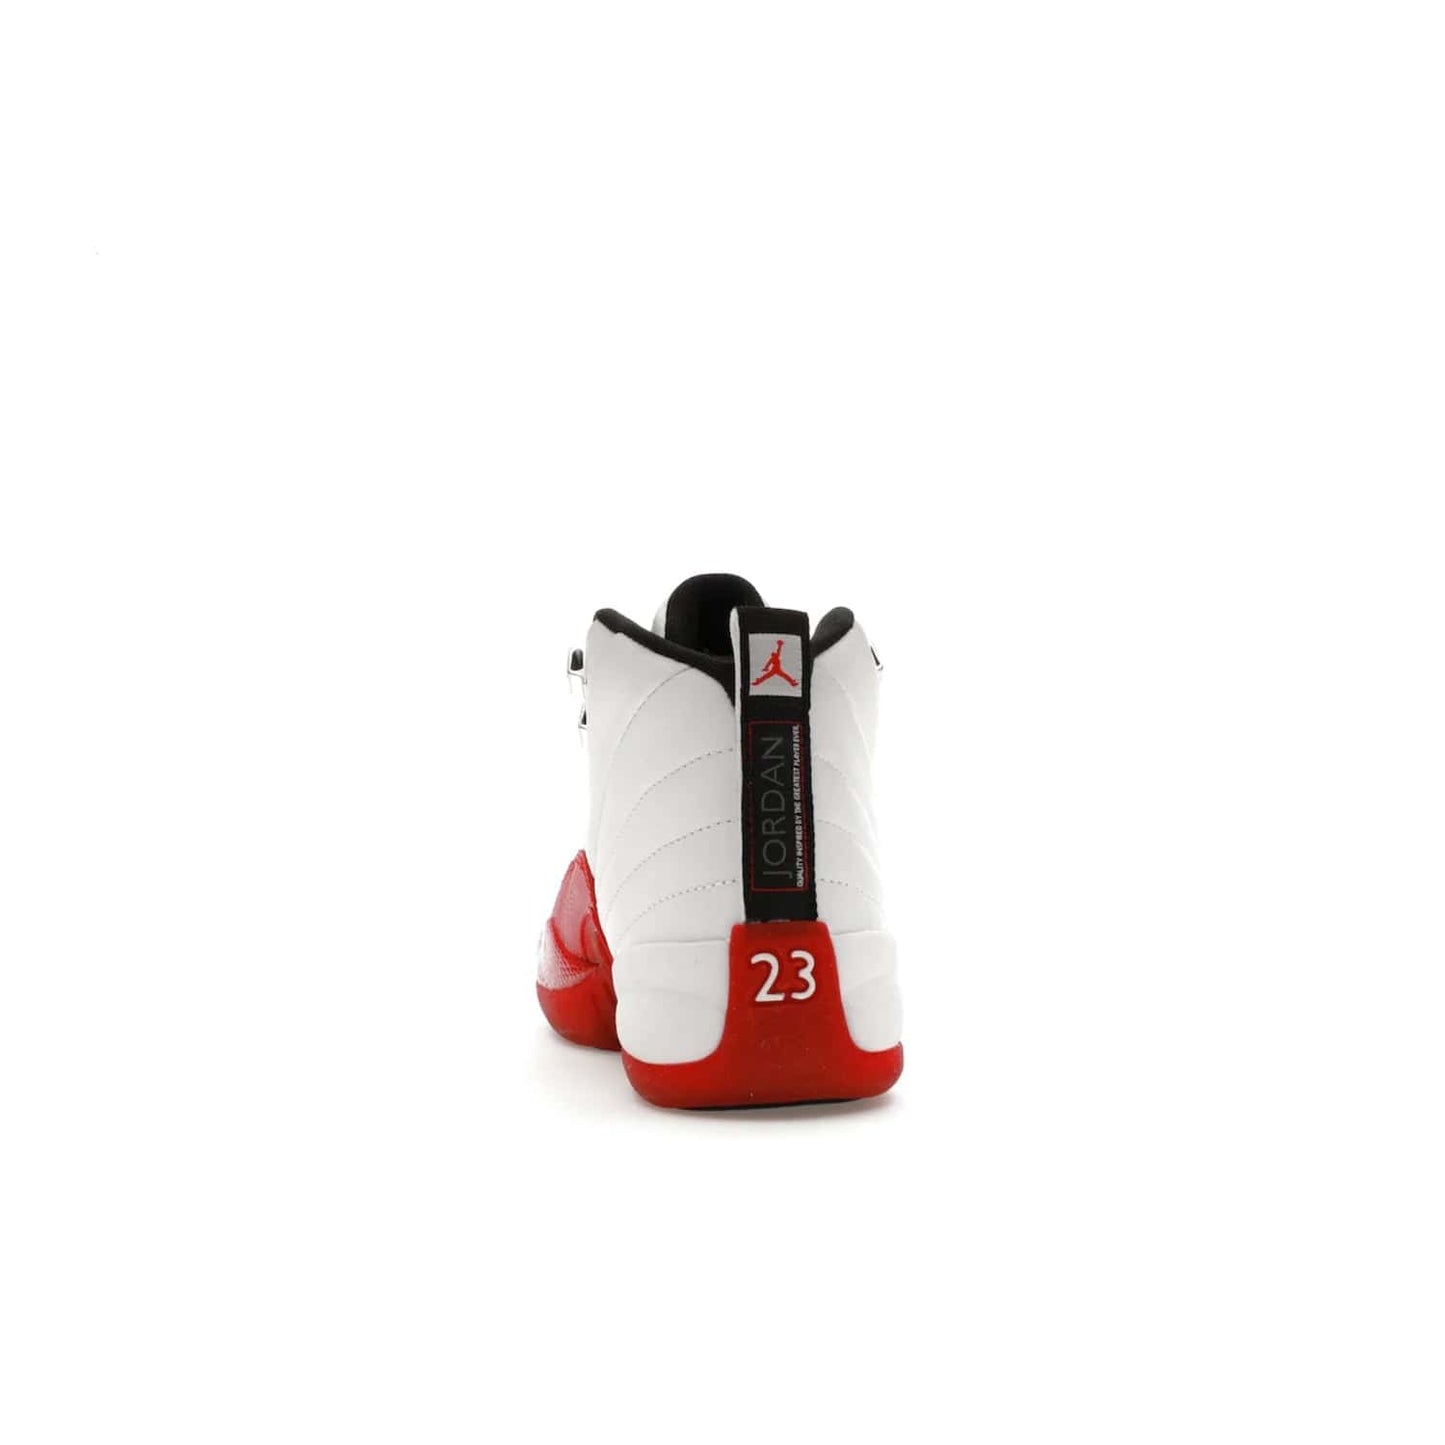 Jordan 12 Retro Cherry (2023) (GS) - Image 27 - Only at www.BallersClubKickz.com - Grab the Jordan 12 Retro Cherry (2023) (GS) and show off your signature style with these iconic kicks. Dressed in White, Black and Varsity Red, these timeless kicks are sure to turn heads. Available October 28, 2023.